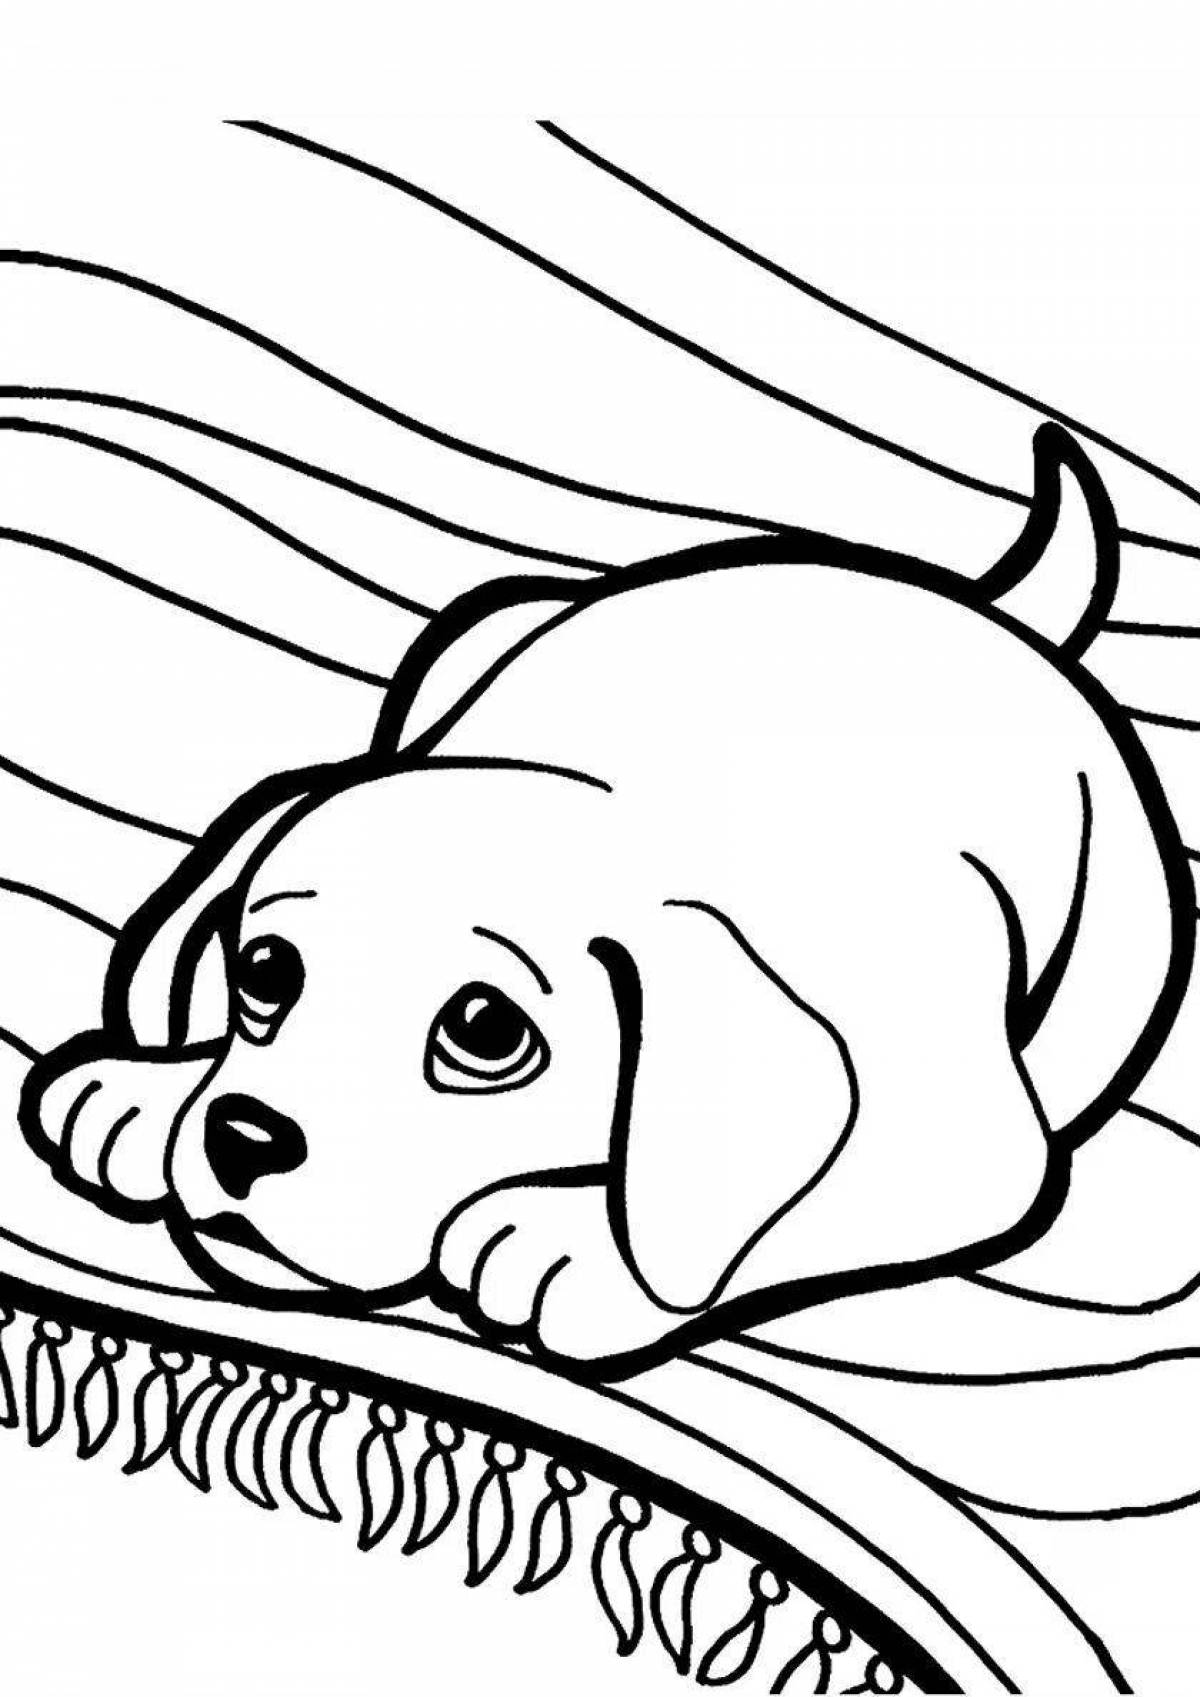 Colorful dog coloring page